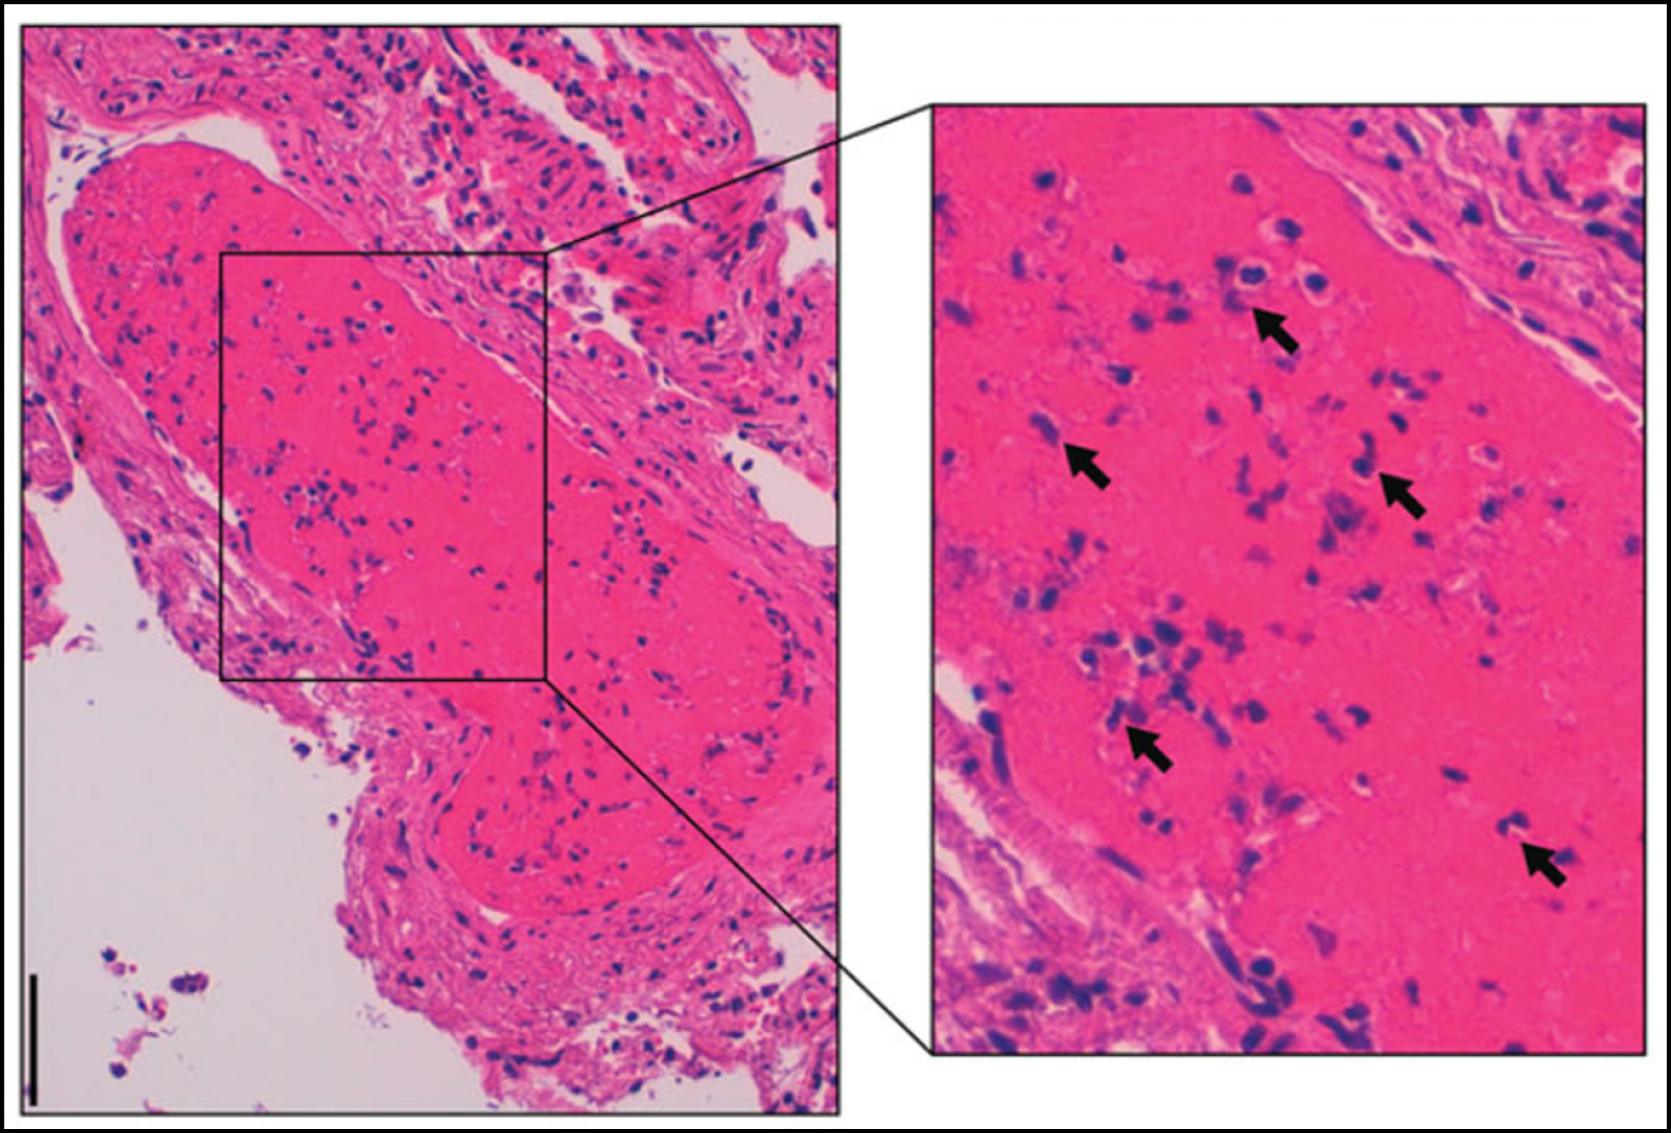 Figure 2: Hematoxylin-eosin staining of a pulmonary immunothrombus in a COVID-19 patient. Immune cells, most notably cells with segmented nuclei, can be observed in the thrombus (black arrows)